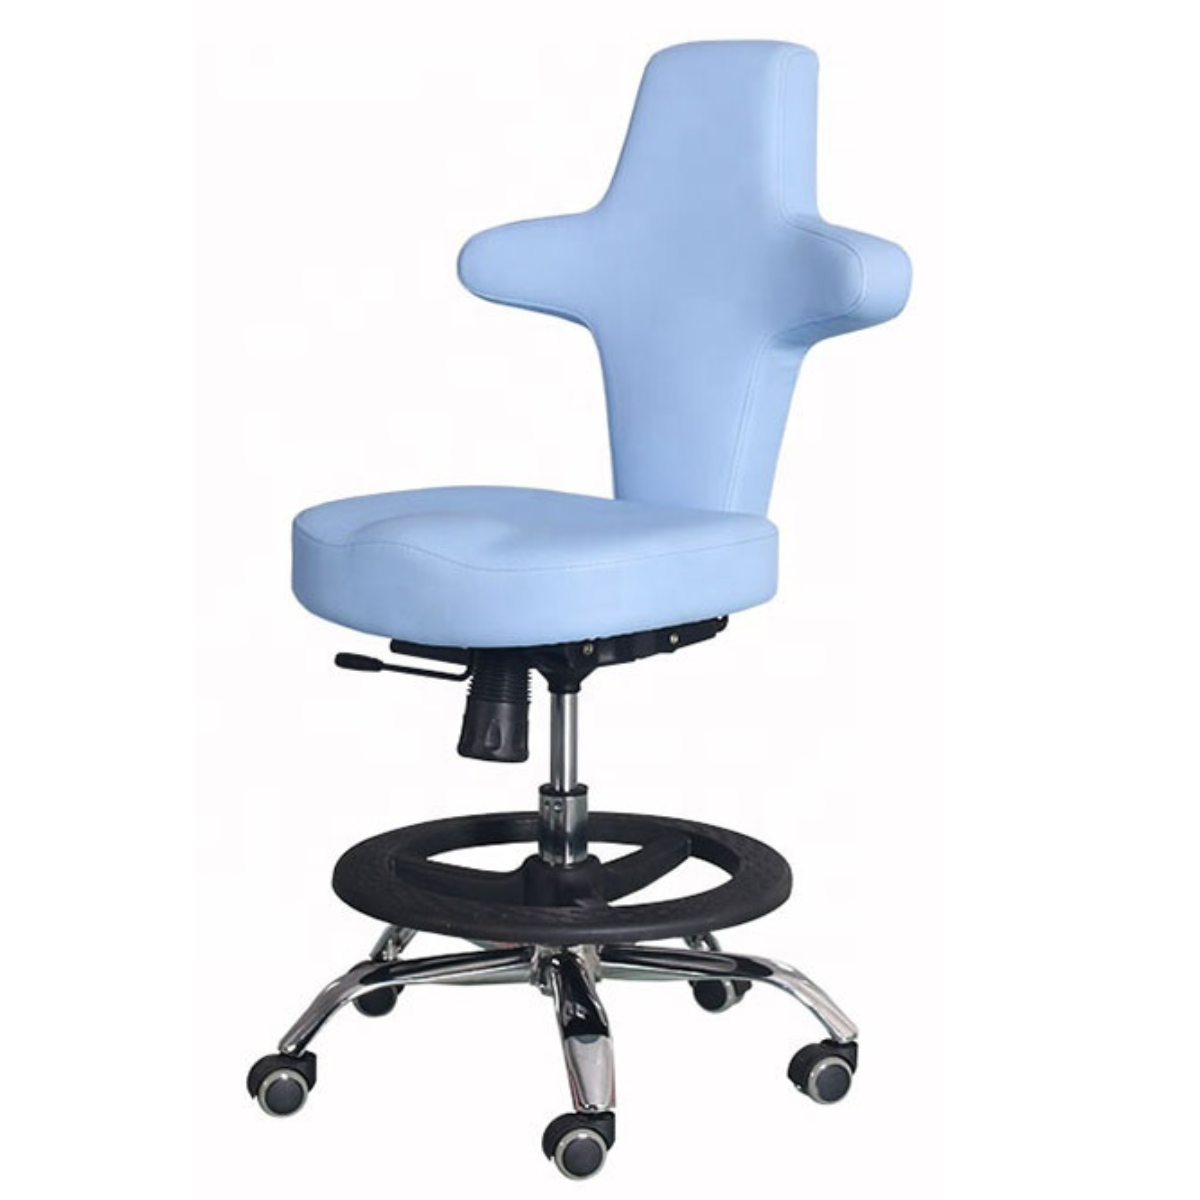 Multifunctional Physician Chair to Reduce Fatigue, Muscle Strain, Nerve Compression | Sit Healthier